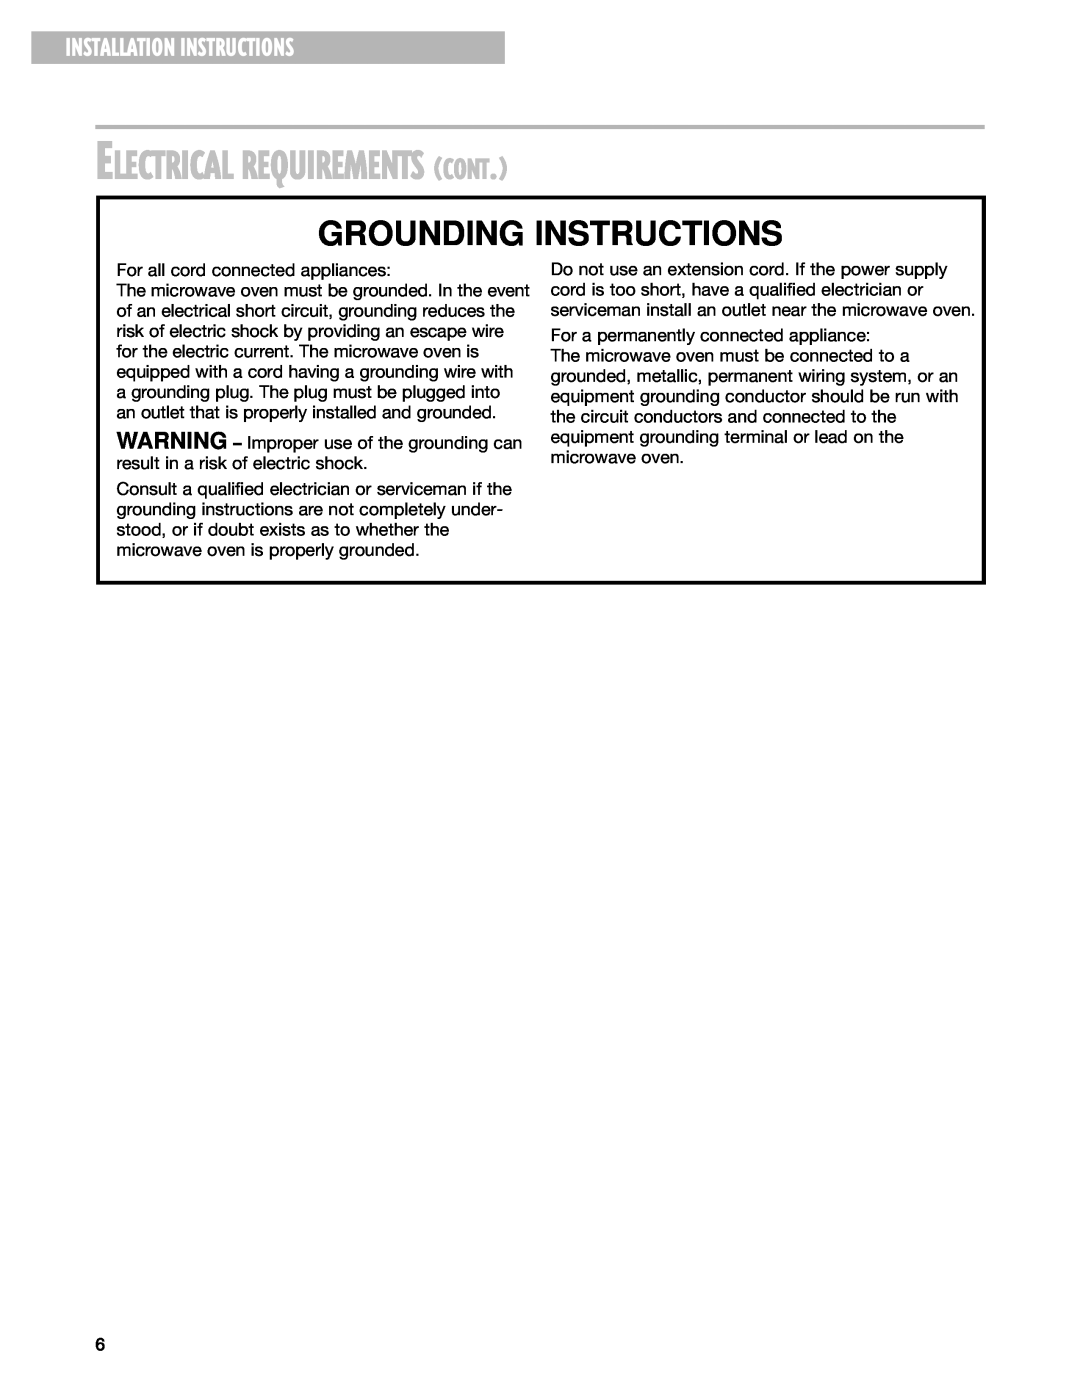 Whirlpool MT1100SH Electrical Requirements Cont, Grounding Instructions, Installation Instructions 